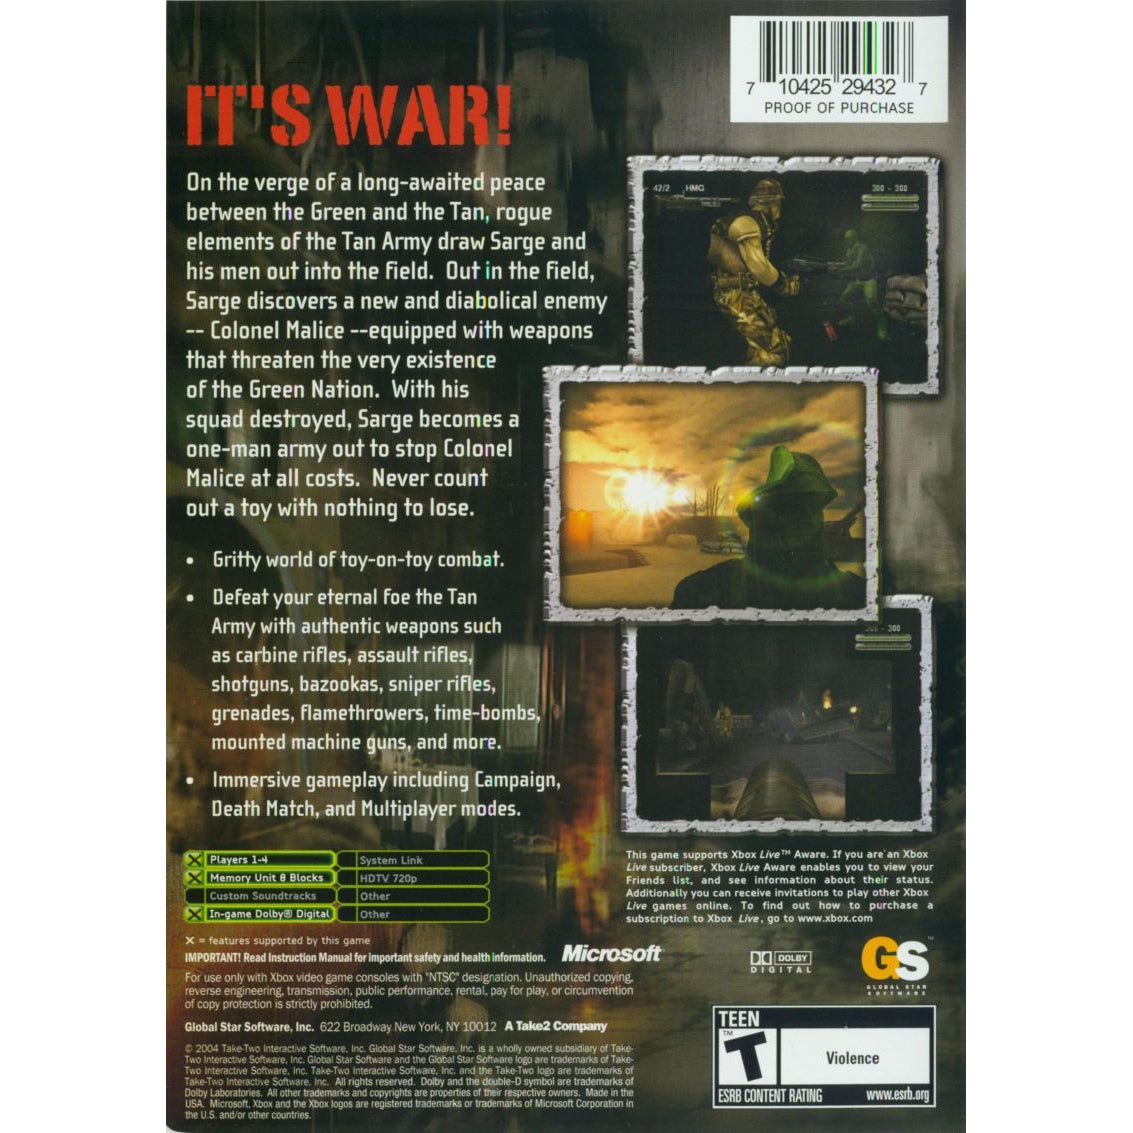 Army Men: Sarge's War - Microsoft Xbox Game Complete - YourGamingShop.com - Buy, Sell, Trade Video Games Online. 120 Day Warranty. Satisfaction Guaranteed.